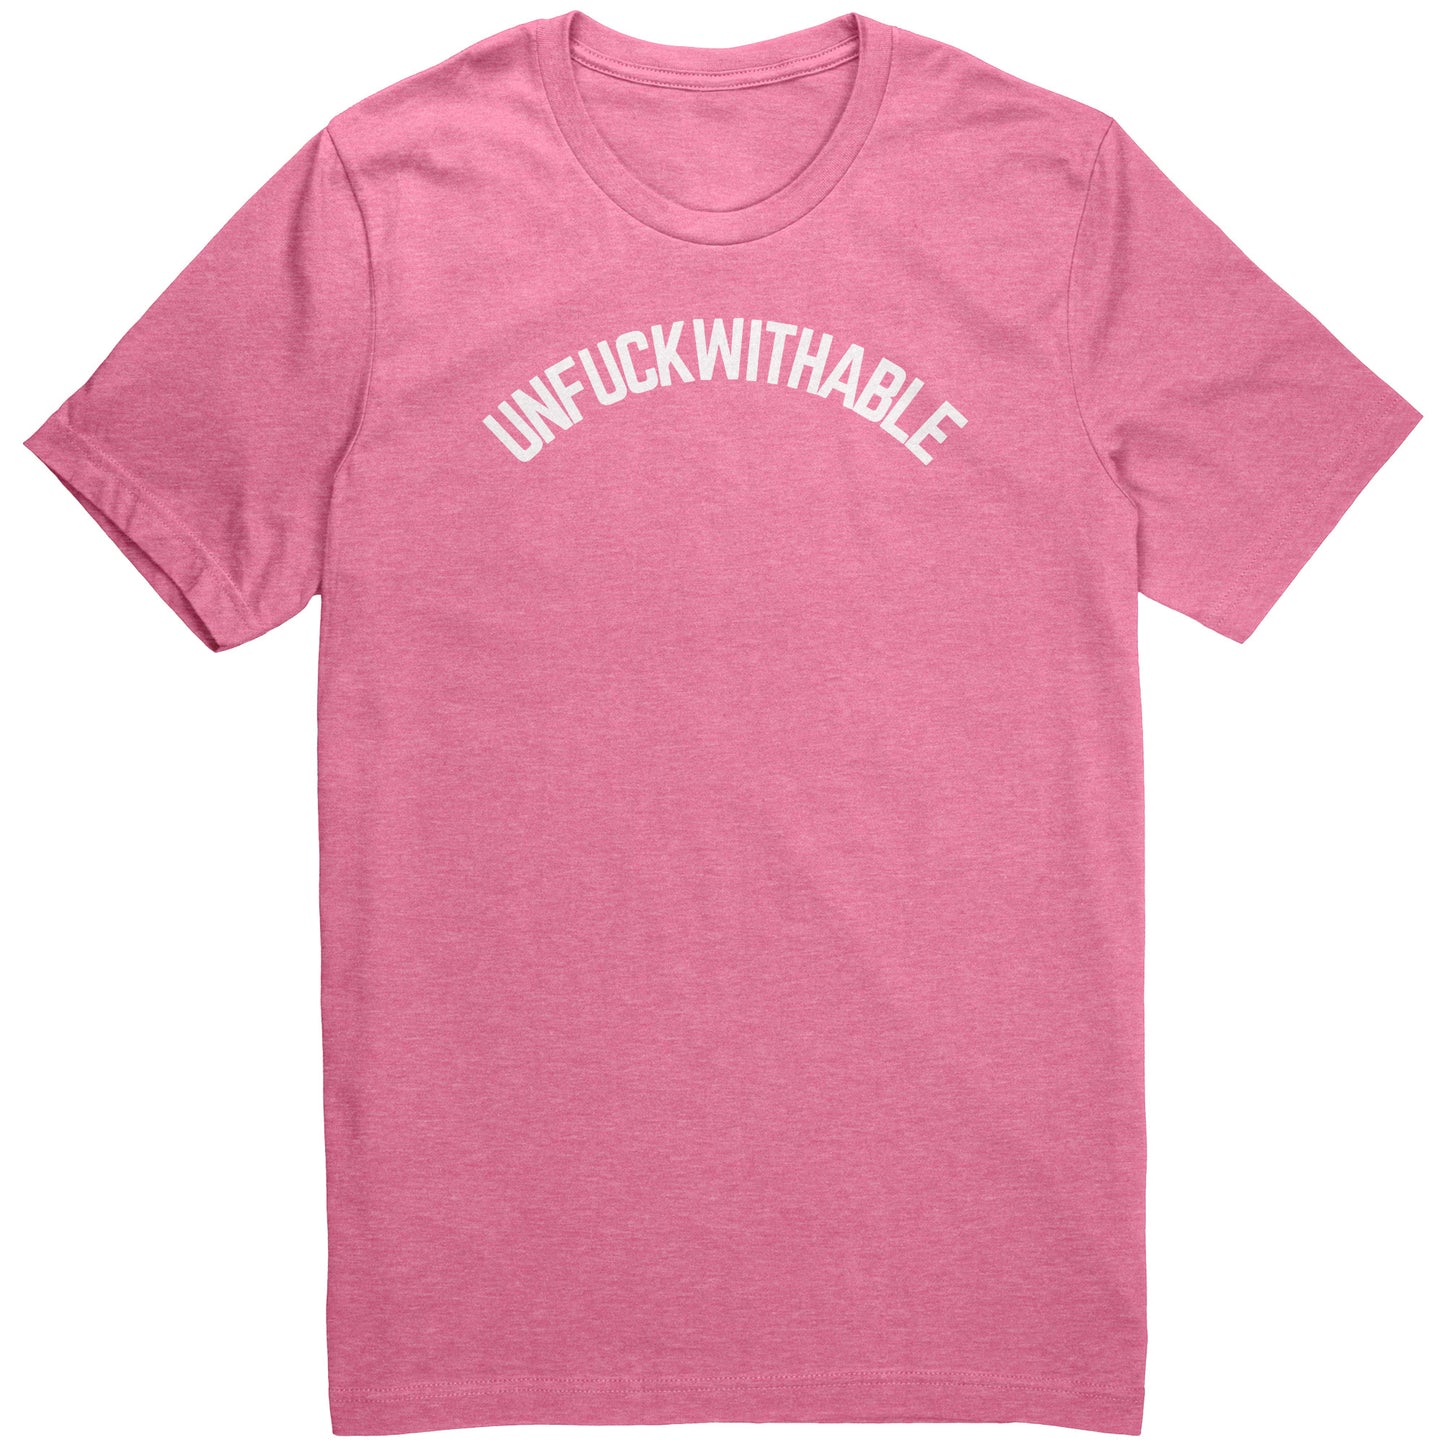 Unf withable Tee